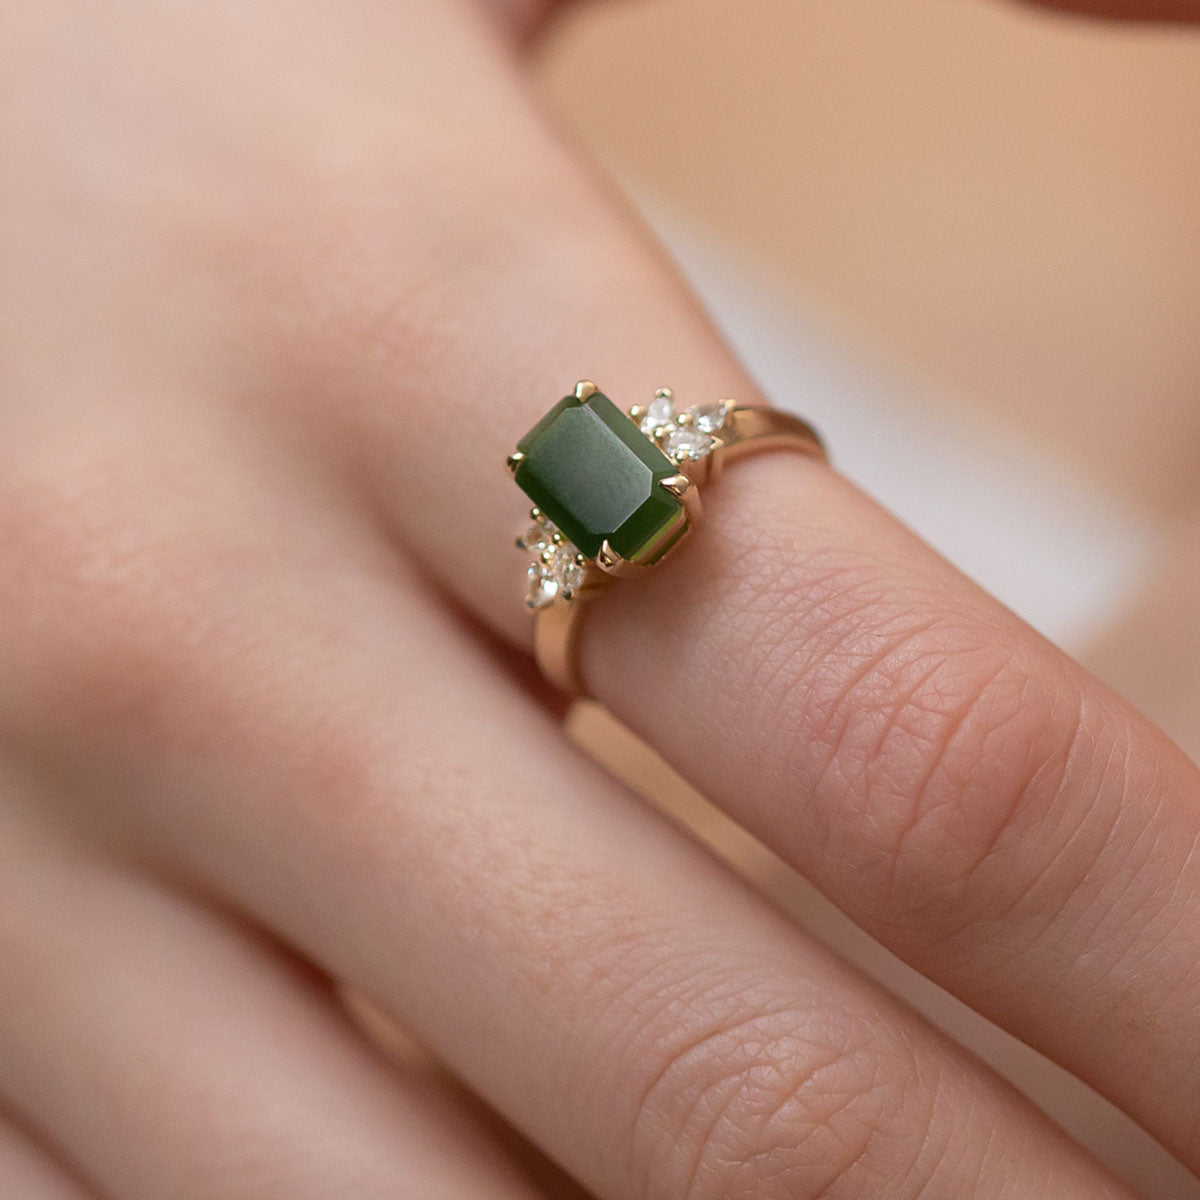 Buy | Bottle Green Stone Work Adjustable Ring | C25-BF23-75 | Cilory.com